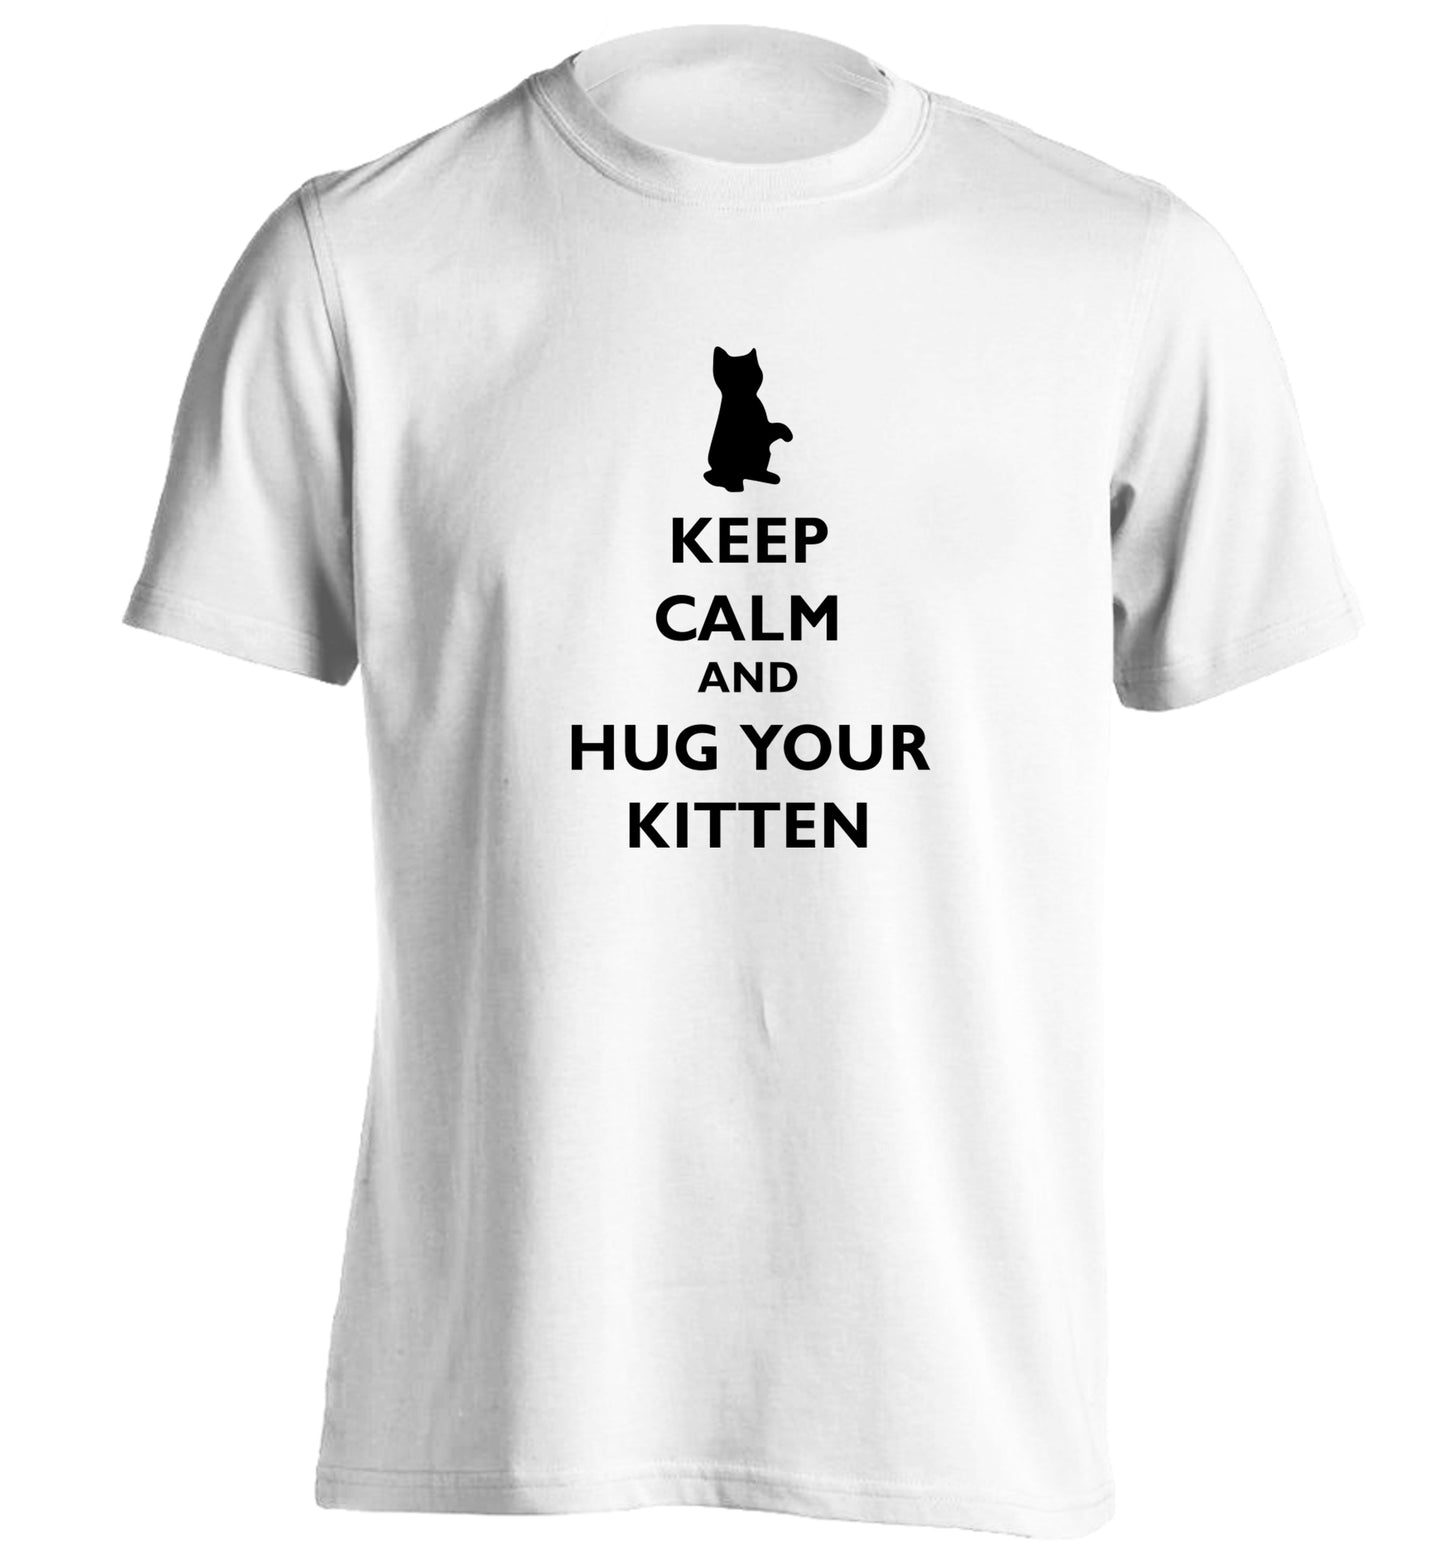 Keep calm and hug your kitten adults unisex white Tshirt 2XL